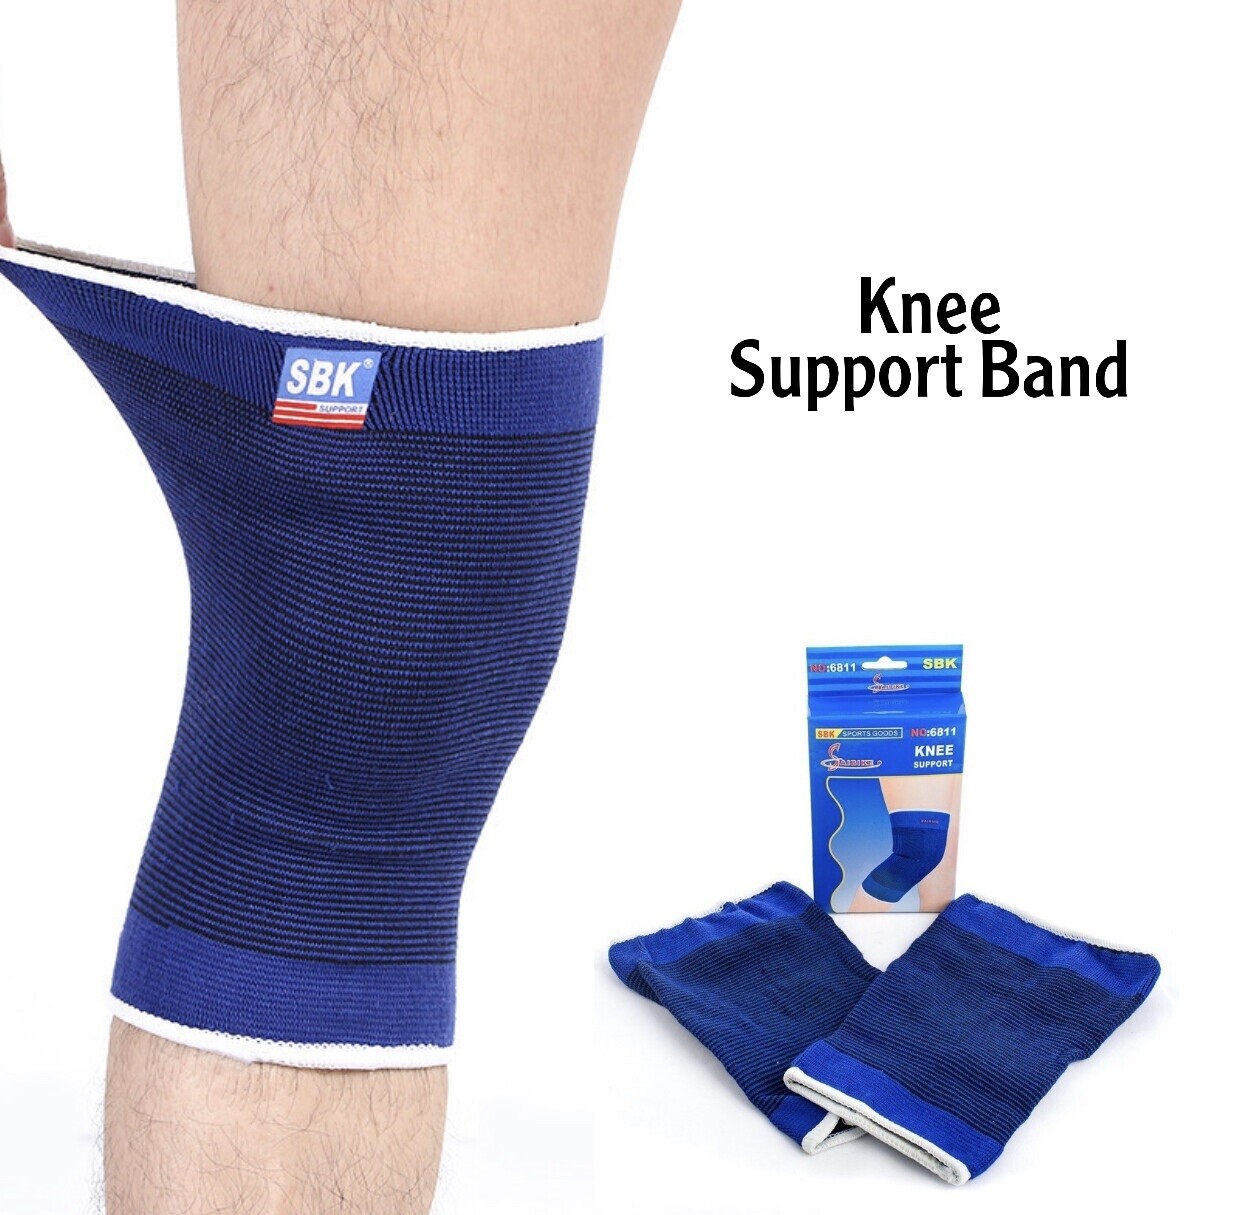 Knee Support Band